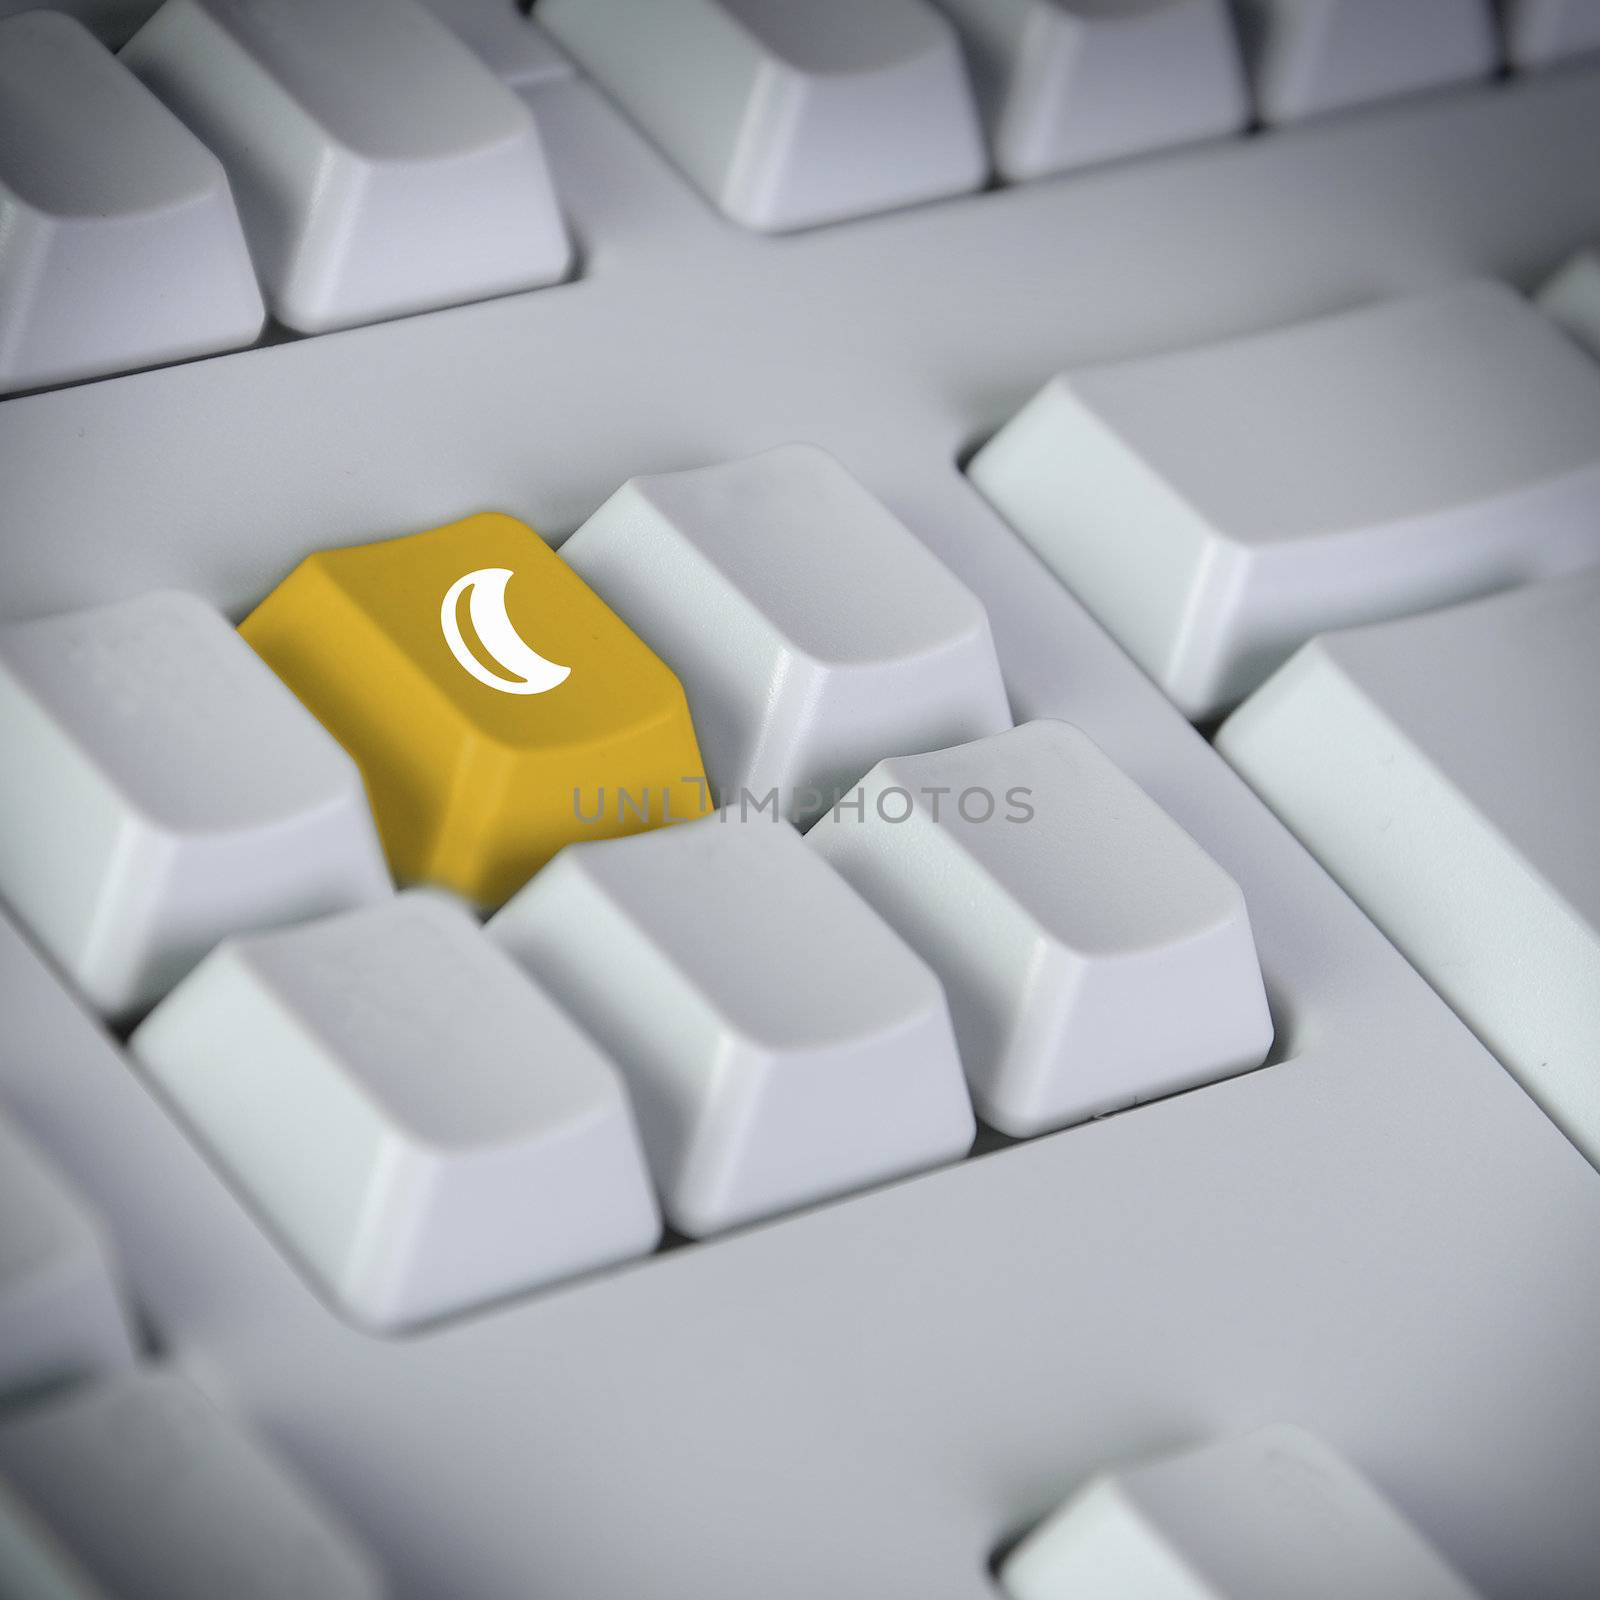 detail of keyboard with key showing moon